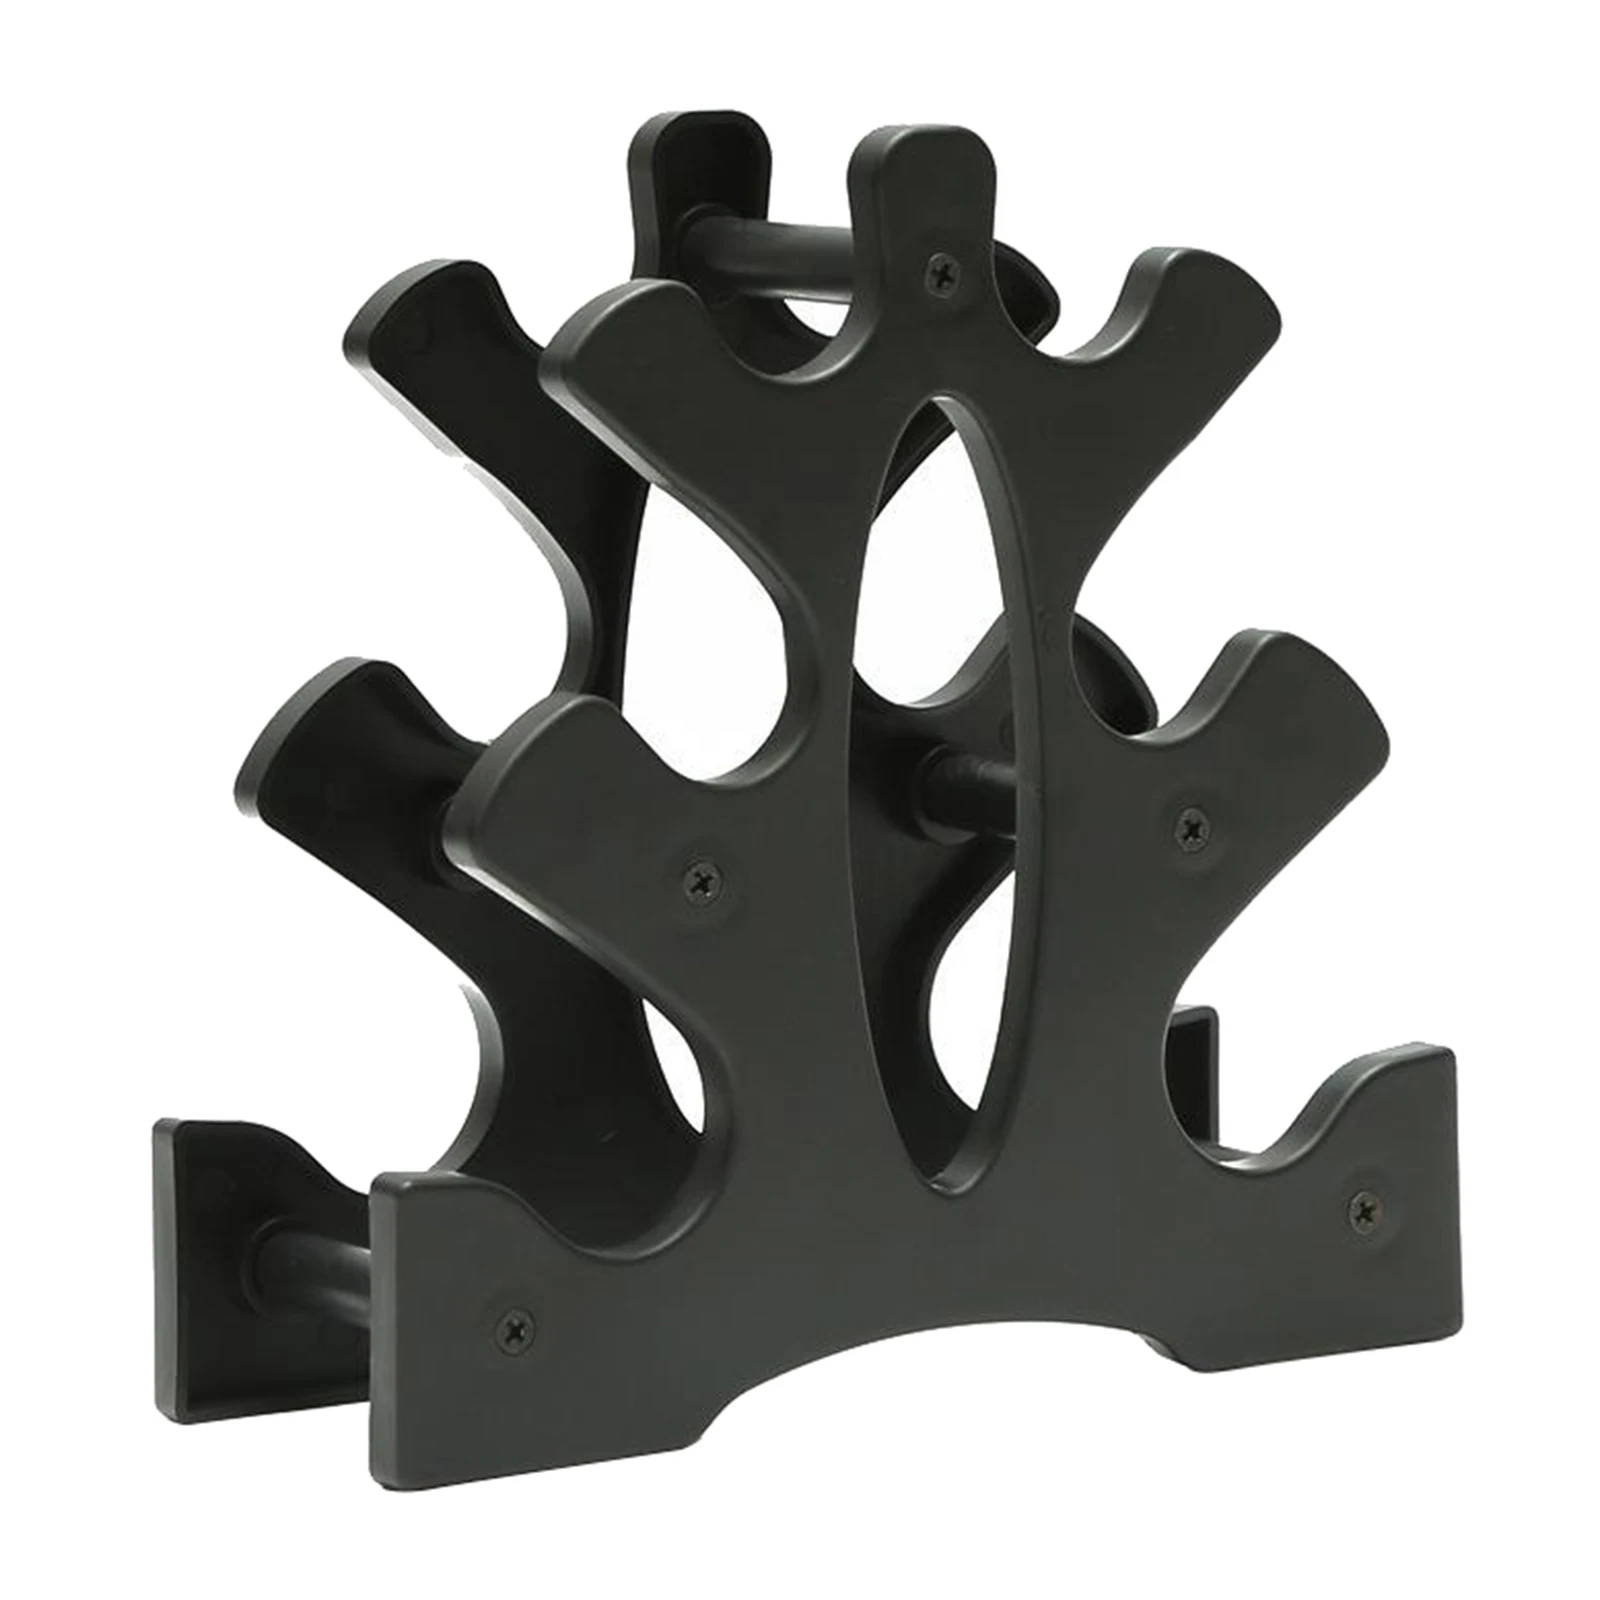 Dumbbell Rack Hand Weights Holder Organizer Tree Stand Sorting Accessories